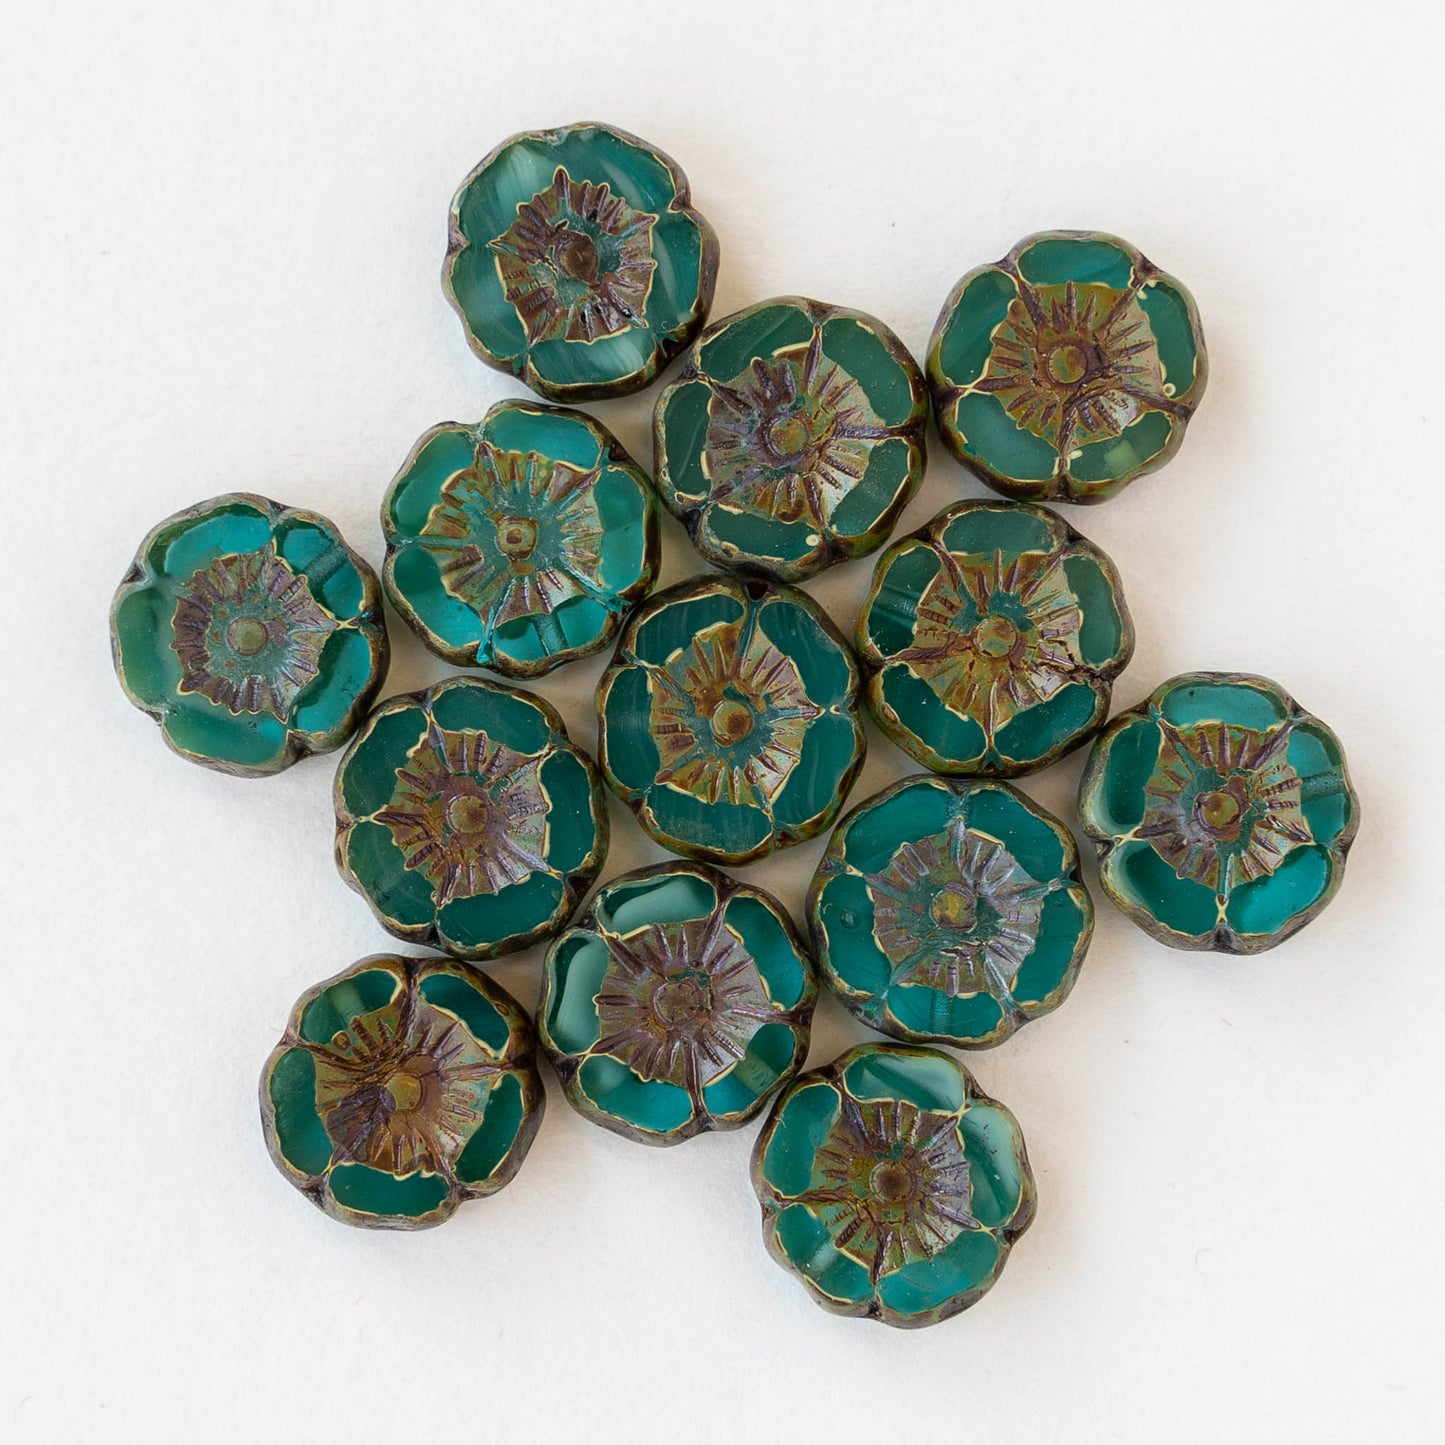 12mm Flower Beads - Sea Green with a Picasso Finish - 10 Beads